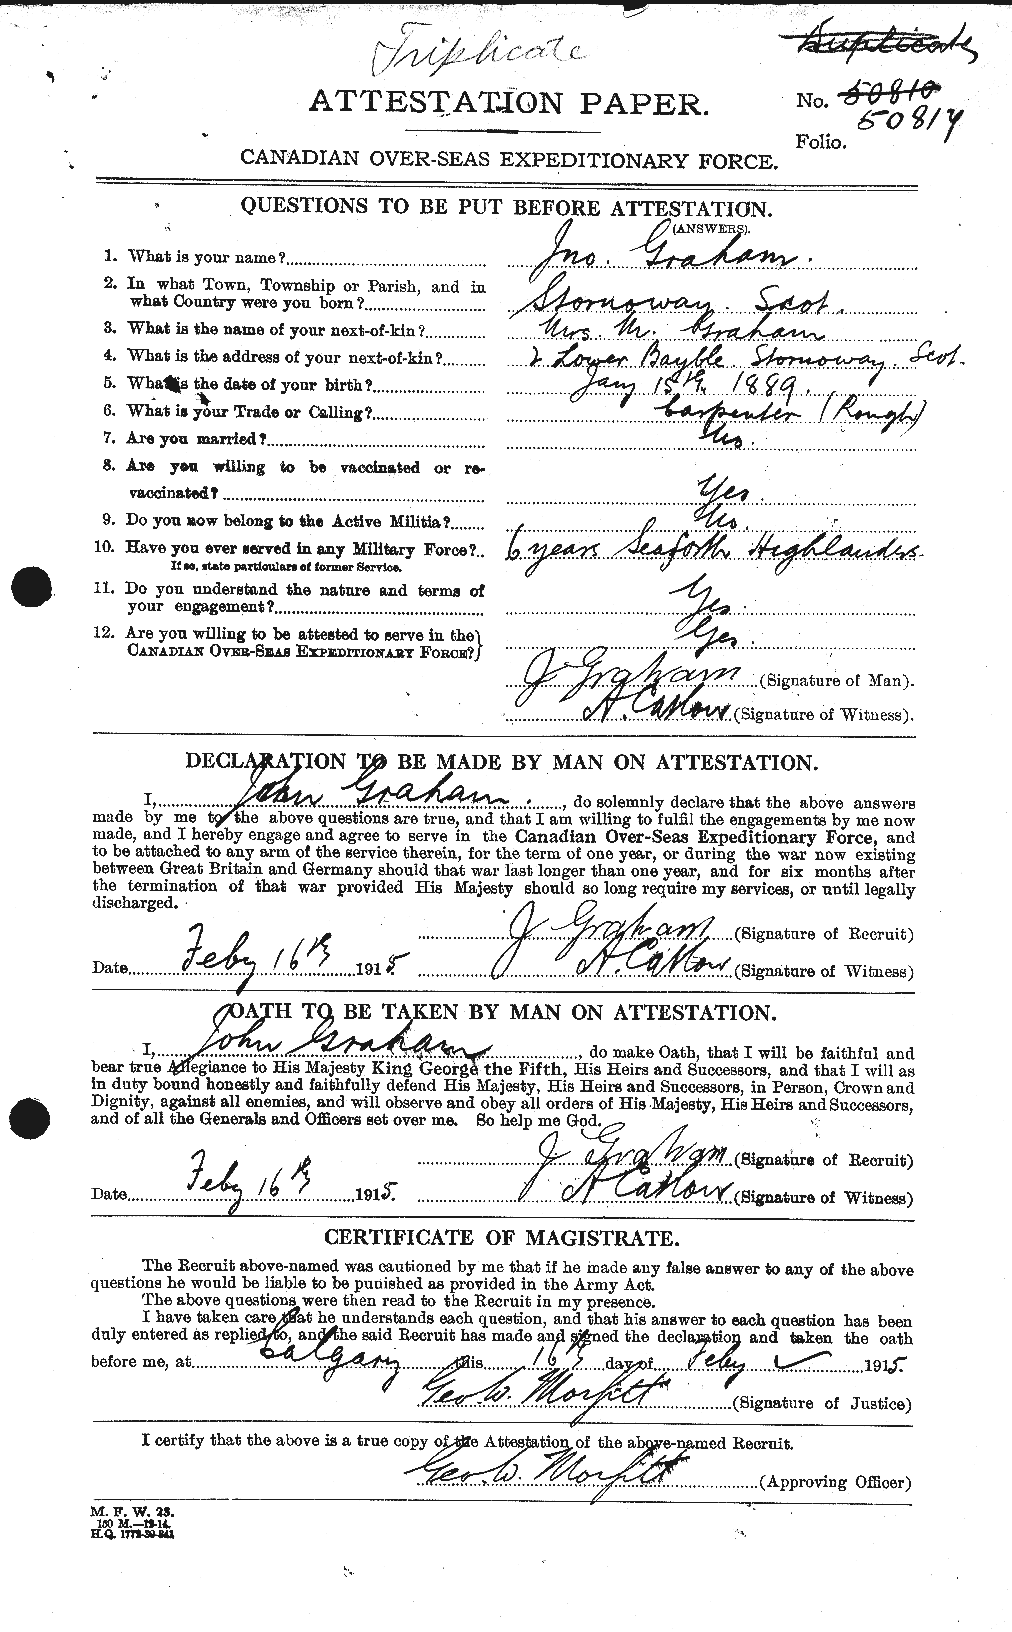 Personnel Records of the First World War - CEF 359106a